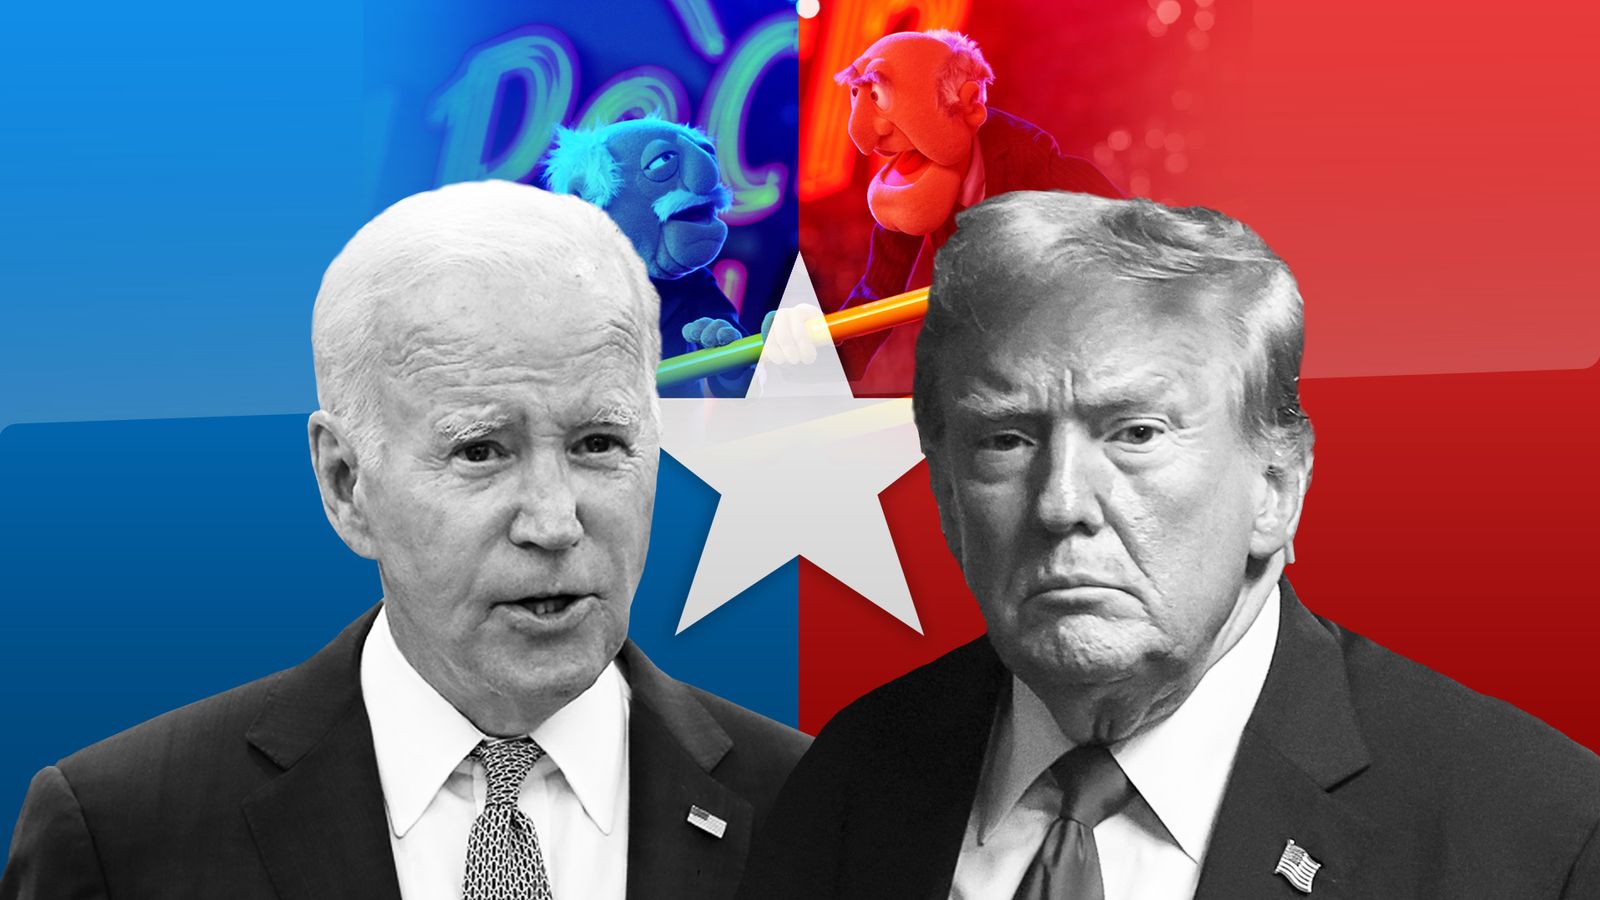 Adam Boulton: 'Like those old guys on The Muppets' - bad sign for democracy as Trump and Biden call shots on how they will debate